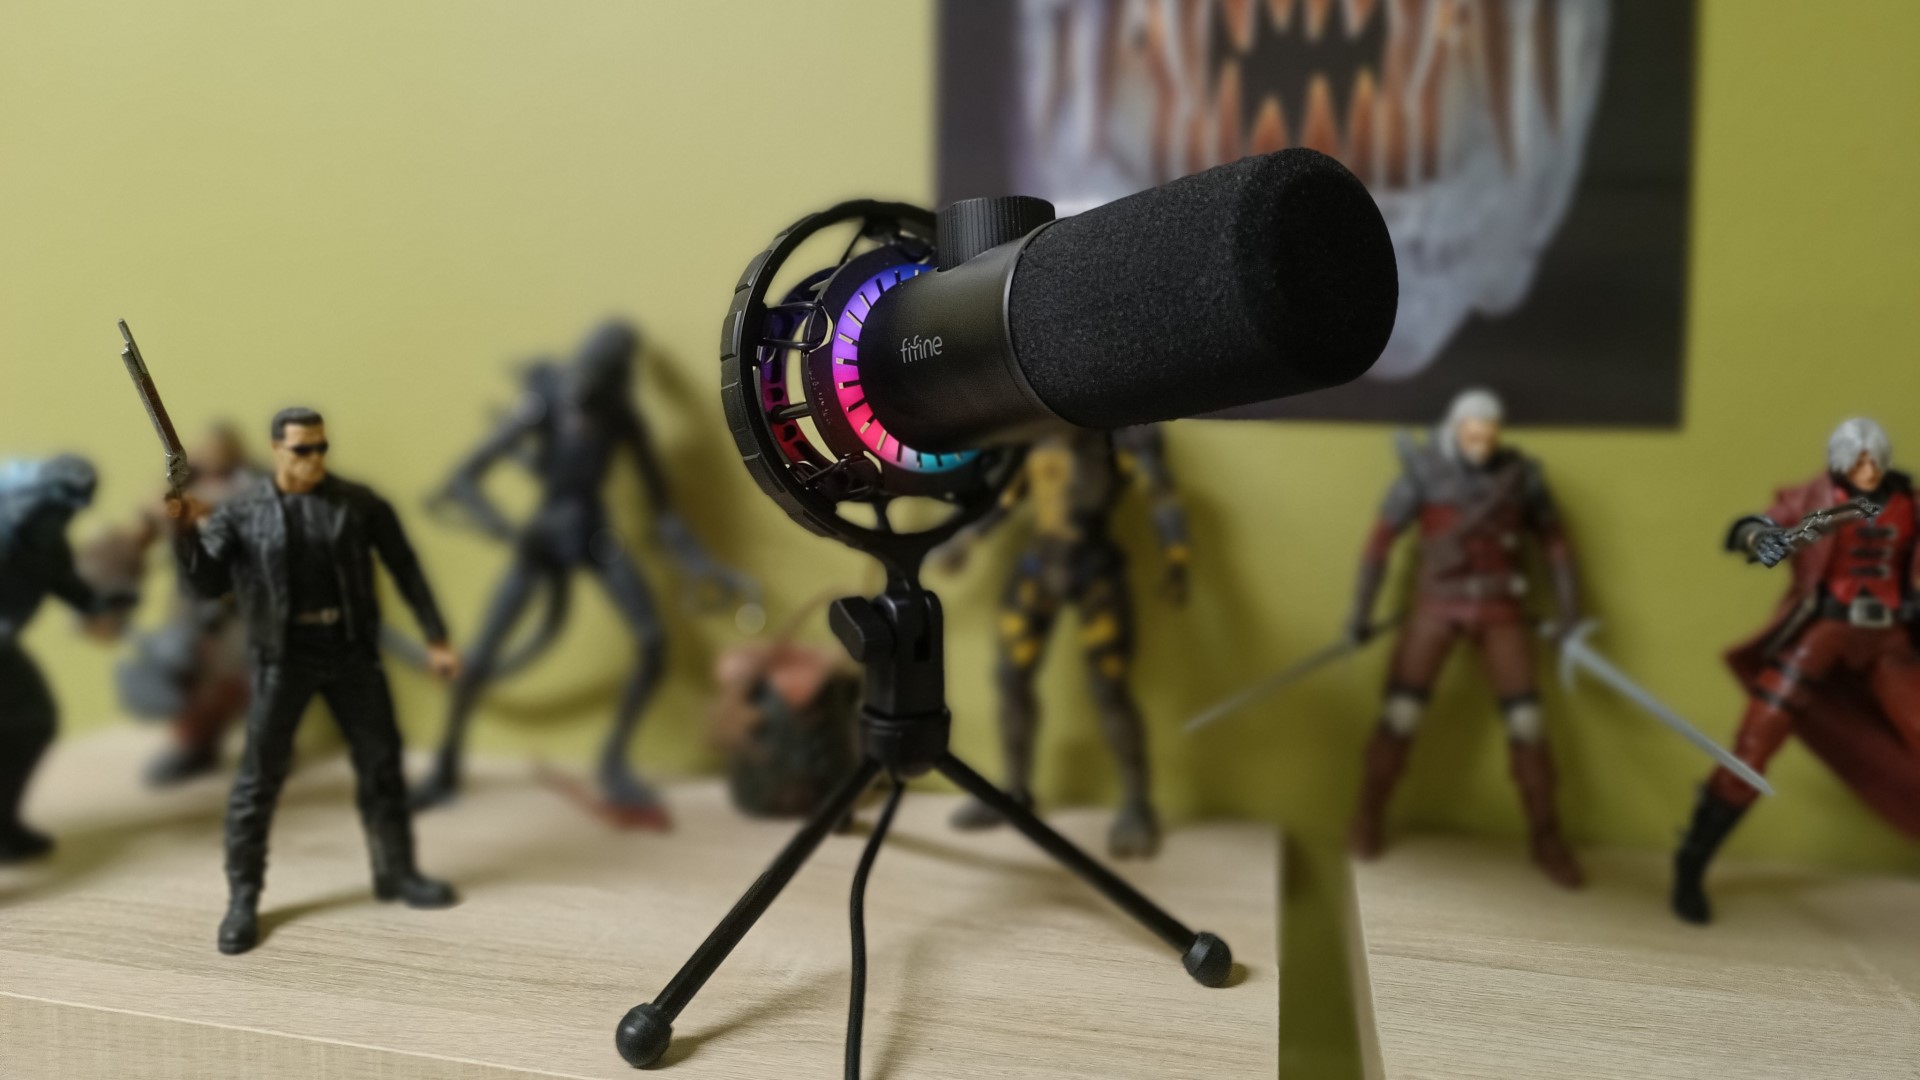 Fifine K658 USB End Address Dynamic Microphone - Test / Review